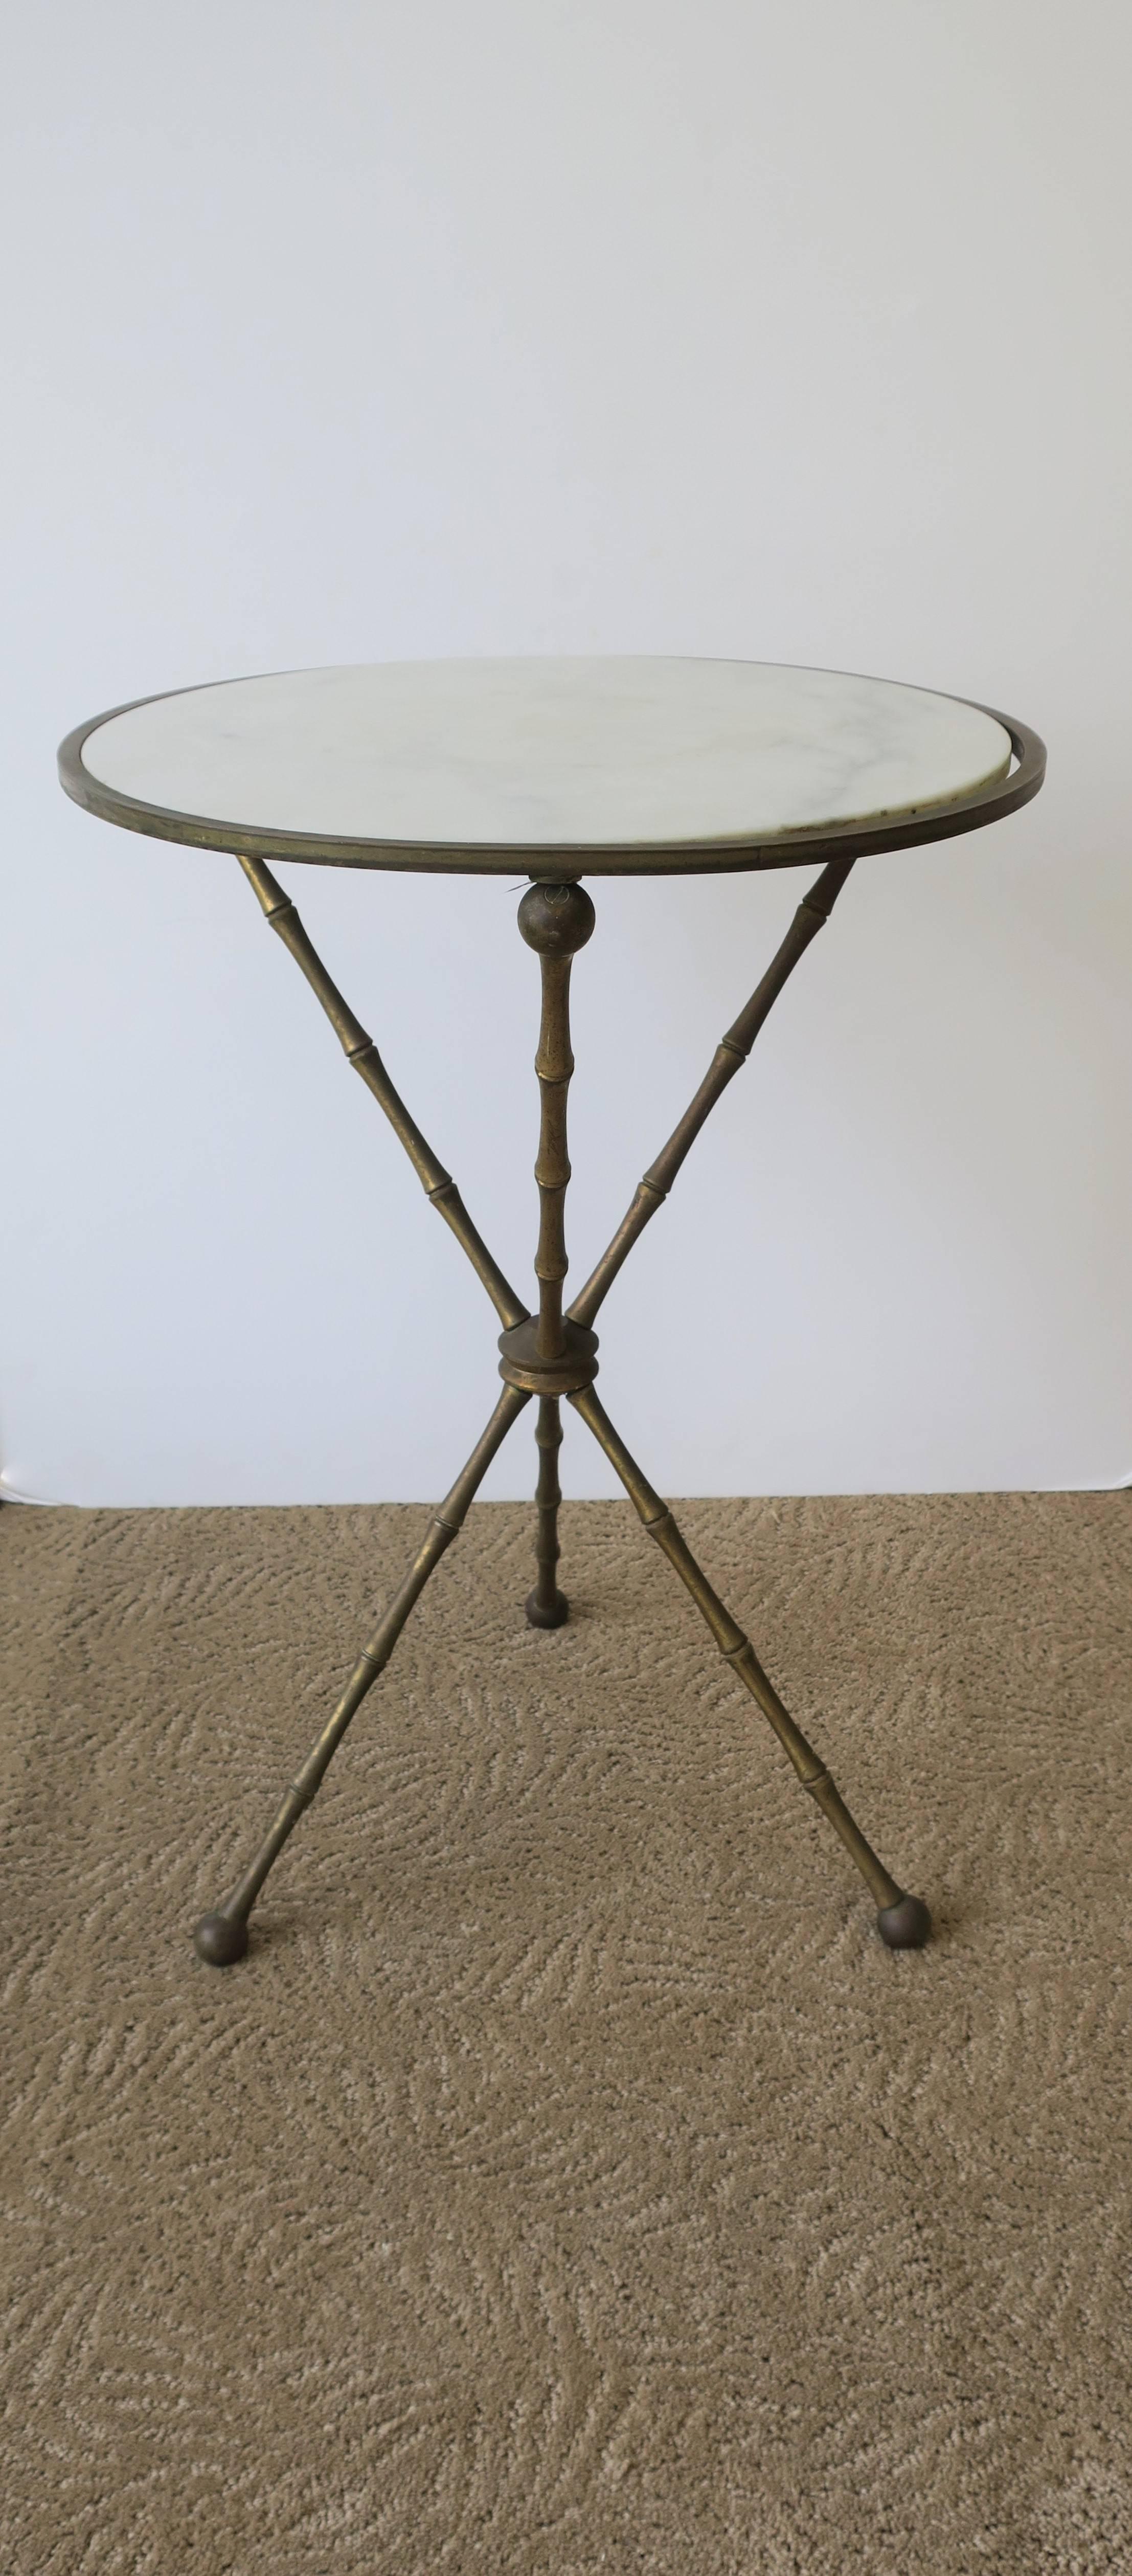 A Mid-Century Italian marble tripod or gueridon side table featuring a brass frame in a 'bamboo' design. Marked 'ITALY' underneath as show in image #5, Italy, circa 1960s. 

Table measures: 23 in. H x 16.75 in. diameter. 

Item available here